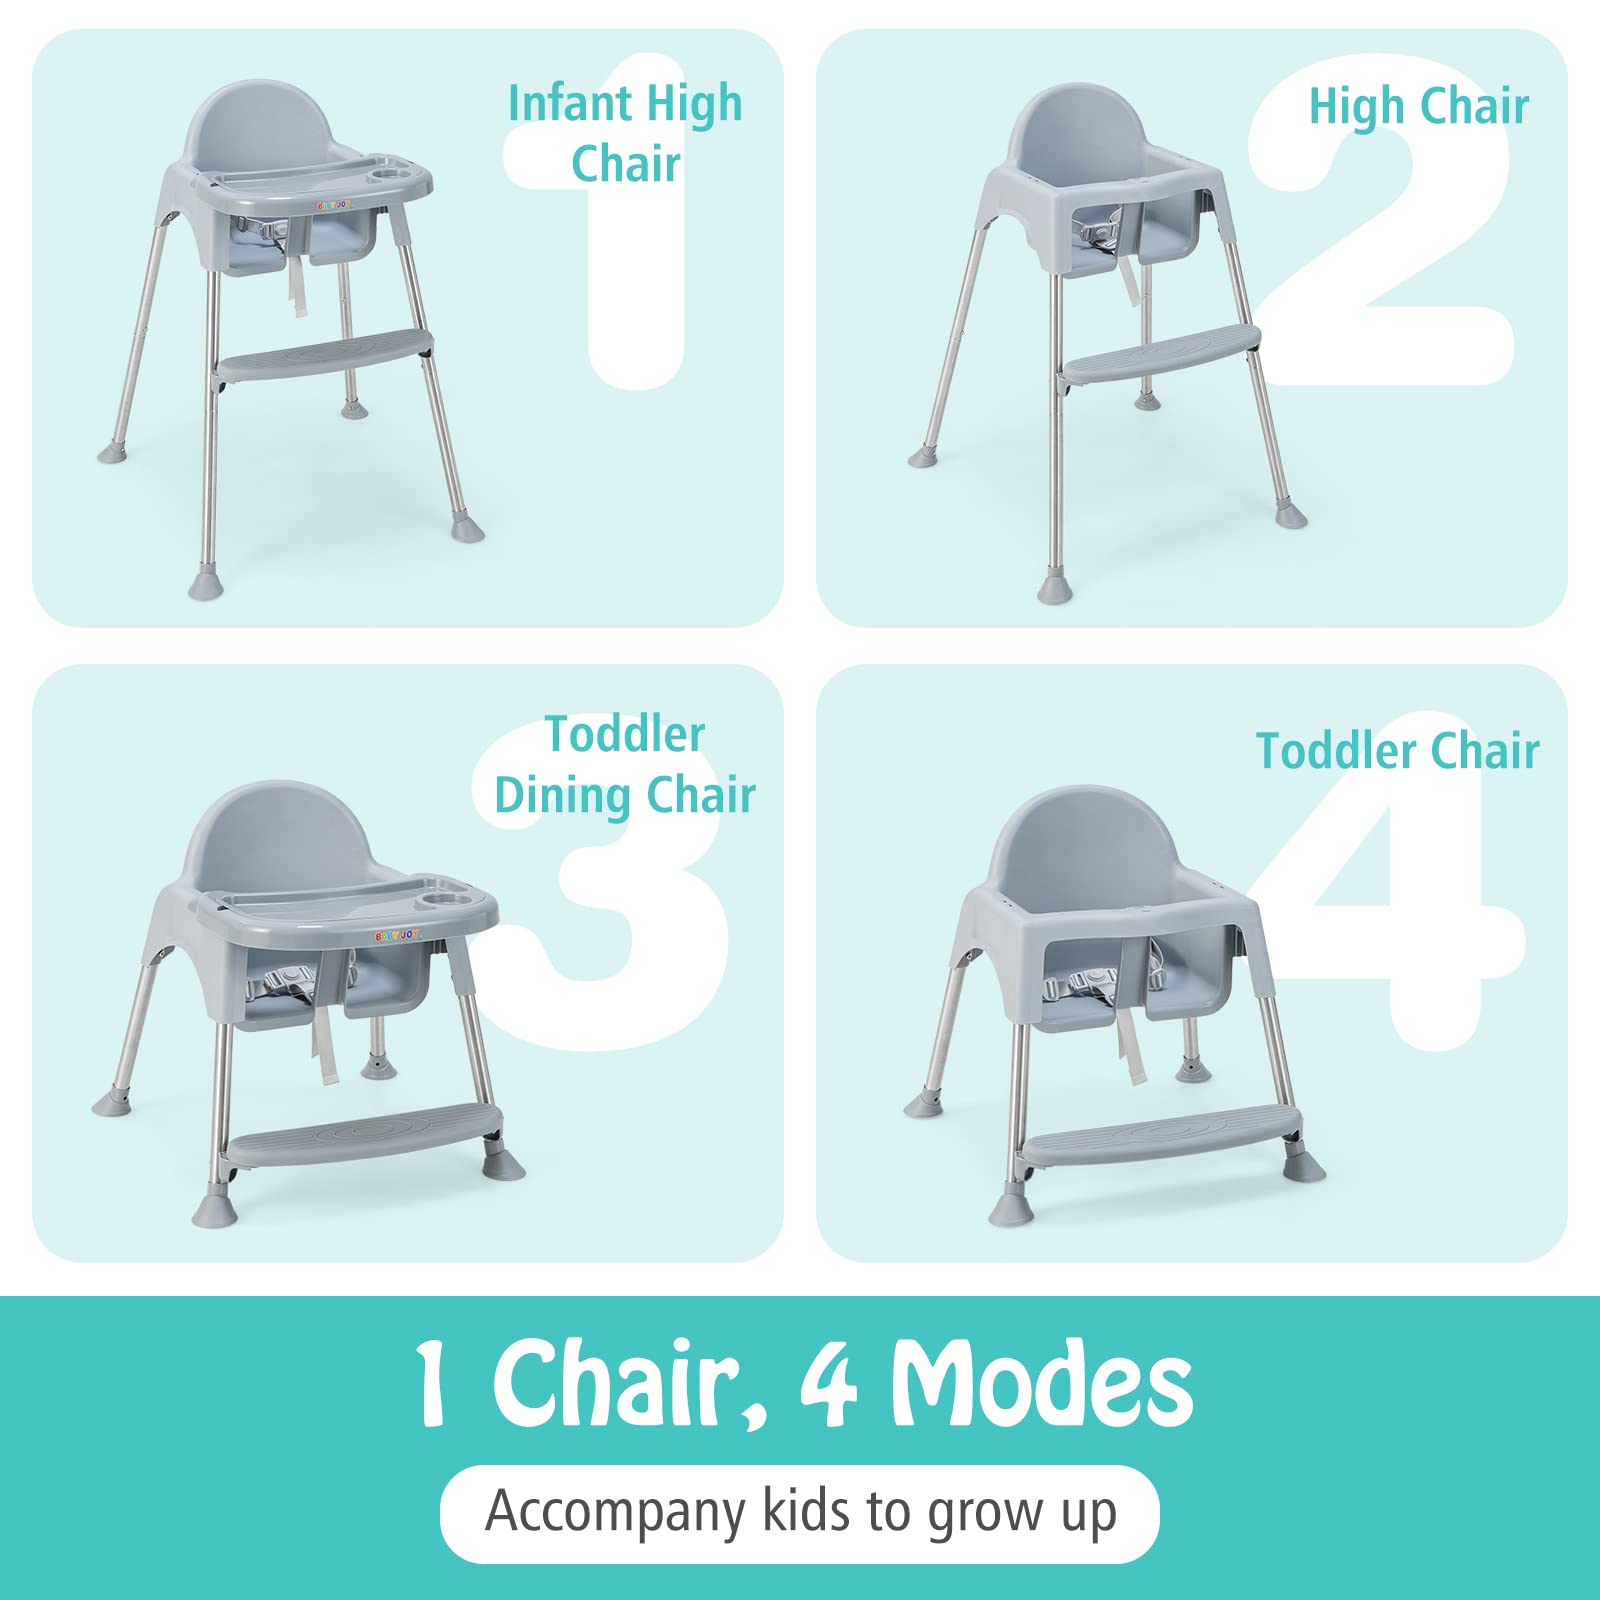 BABY JOY Baby High Chair, 4 in 1 Convertible High Chair with Adjustable Legs